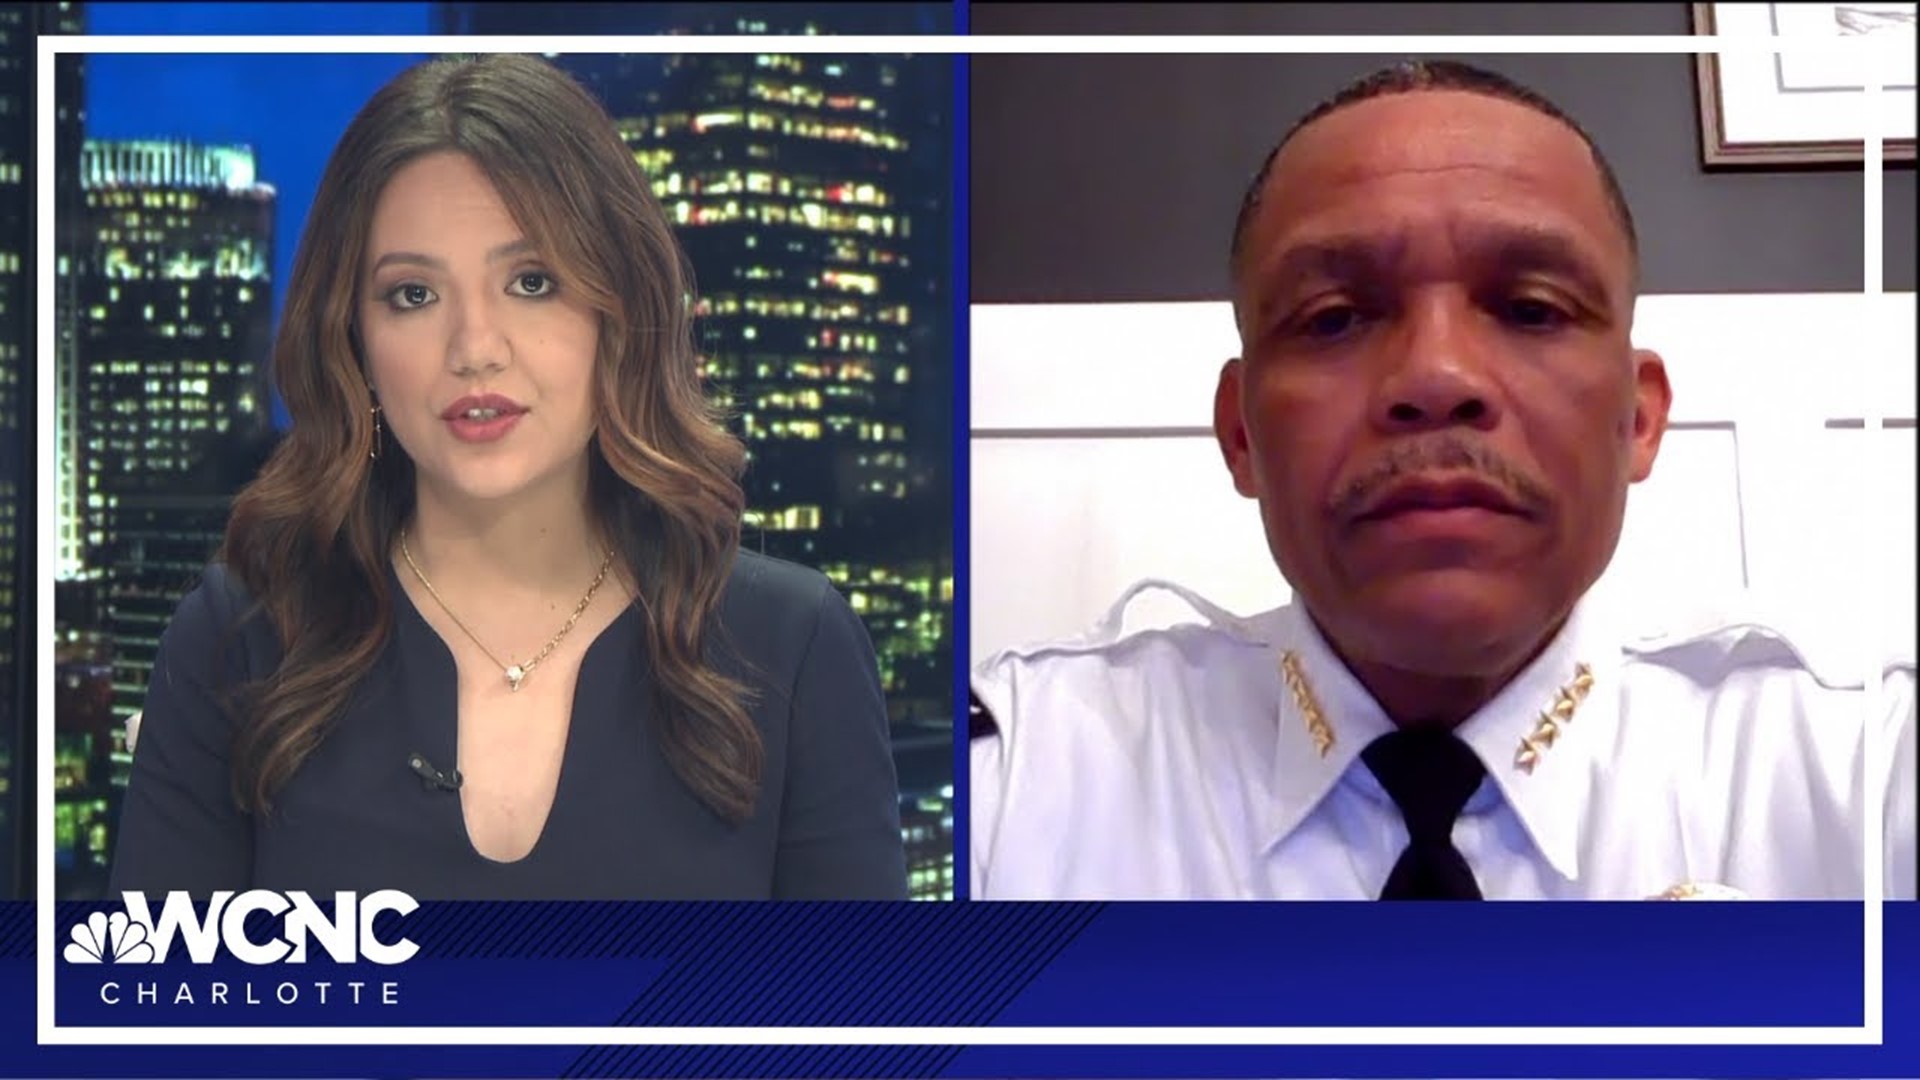 WCNC Charlotte's Vanessa Ruffes spoke to Chief Jennings about youth violence, creating a juvenile detention facility and how the community can work together to solve